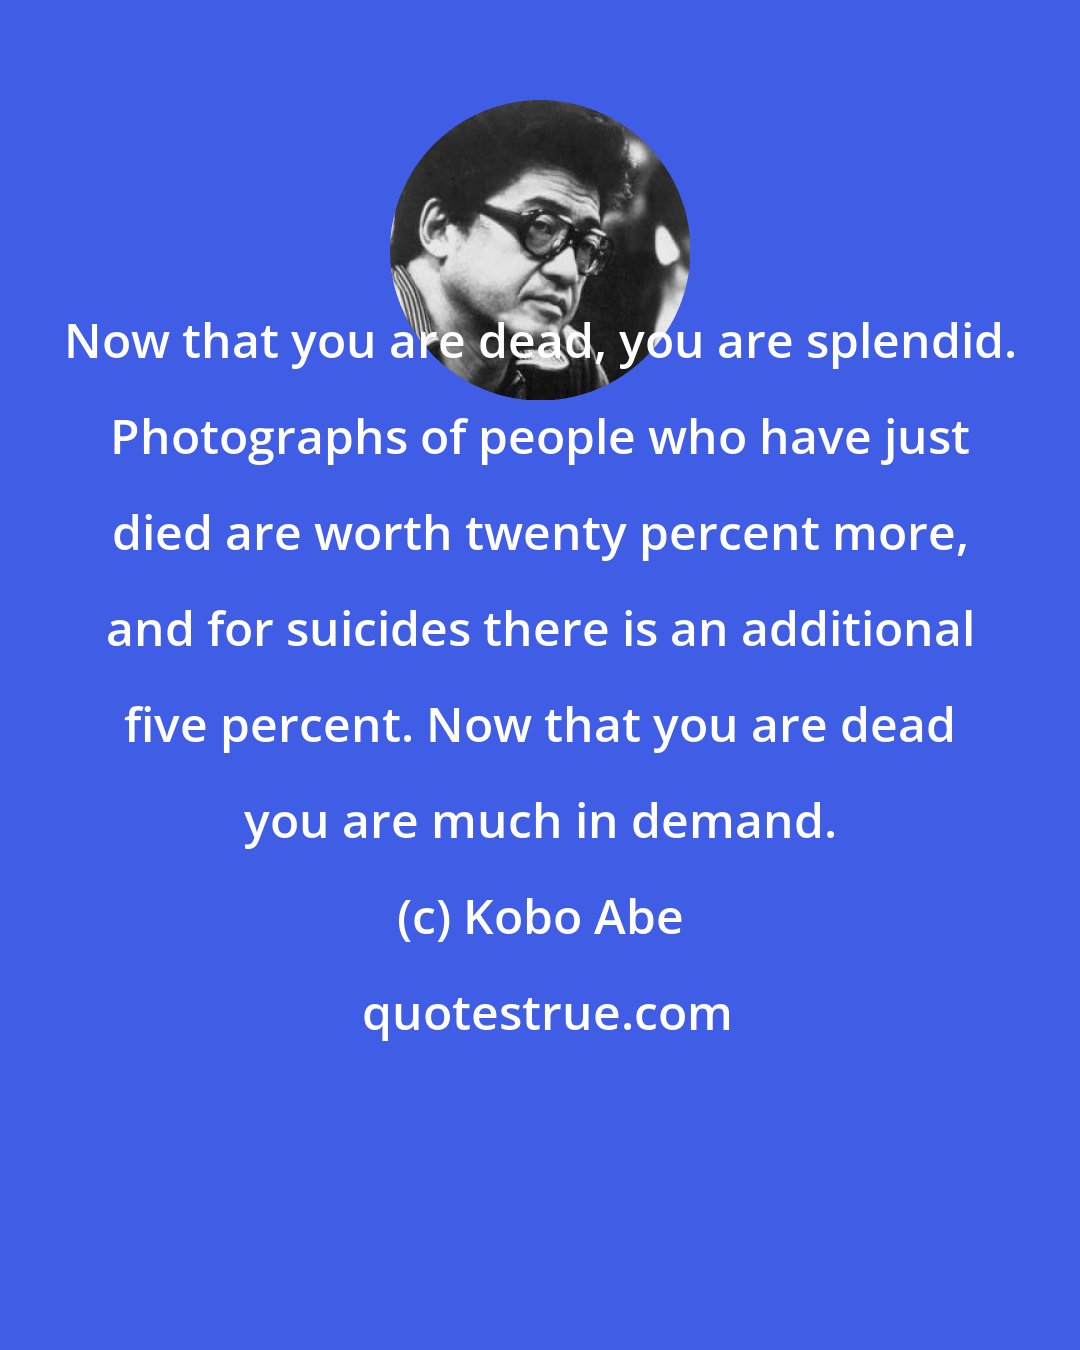 Kobo Abe: Now that you are dead, you are splendid. Photographs of people who have just died are worth twenty percent more, and for suicides there is an additional five percent. Now that you are dead you are much in demand.